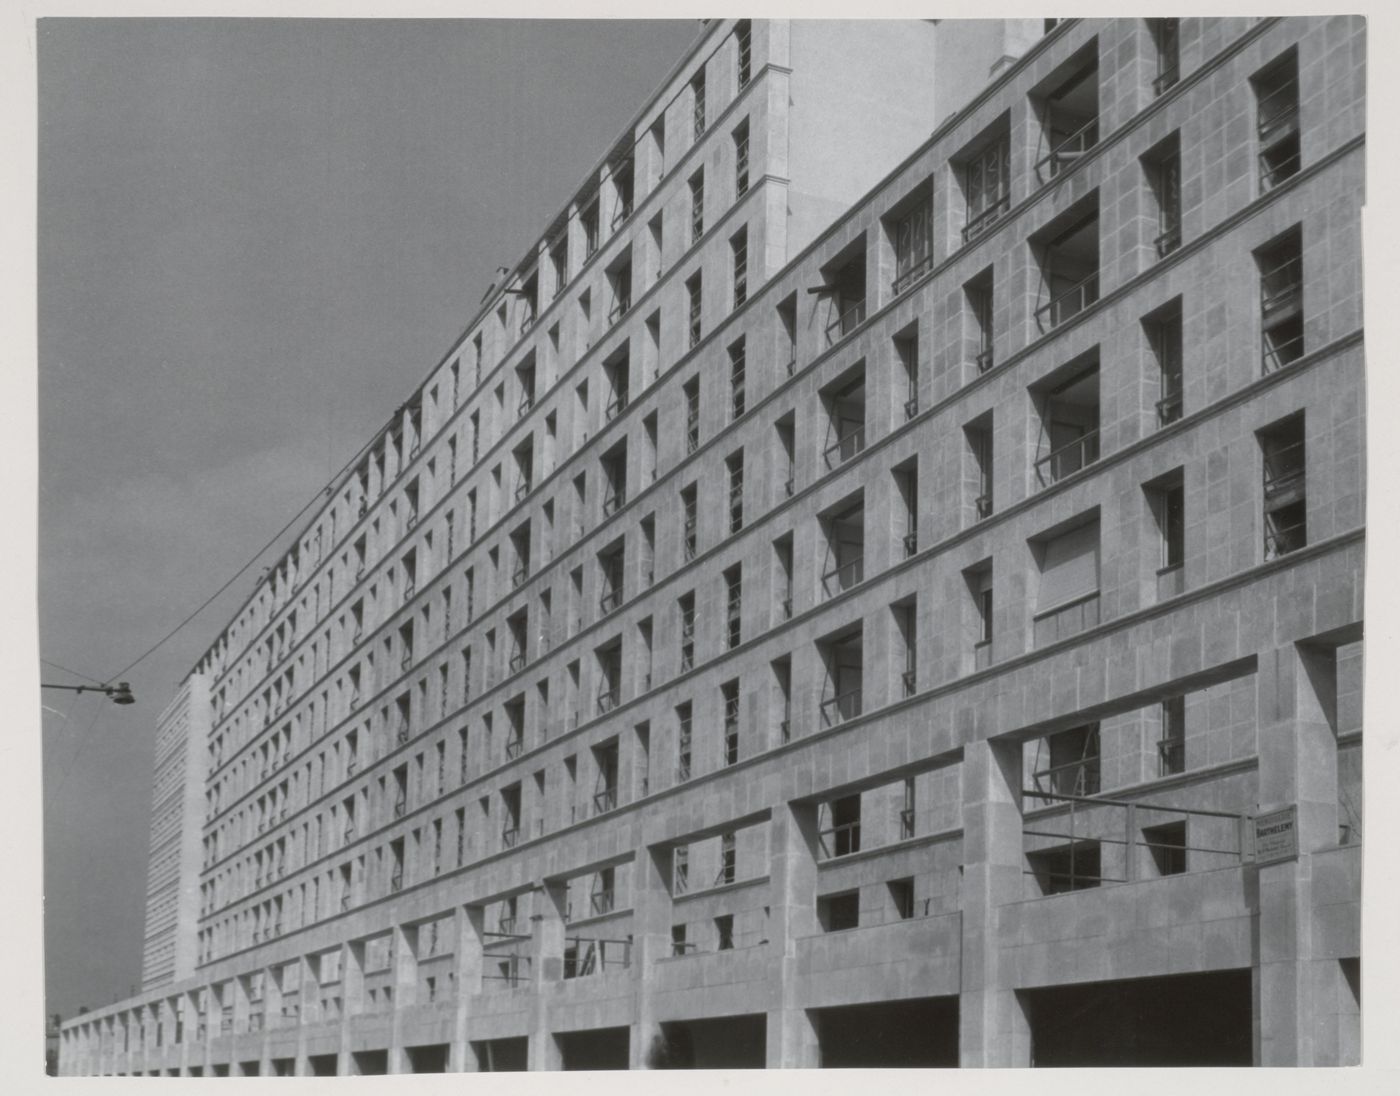 Partial view of a façade of a high-rise building, Marseille [?], France